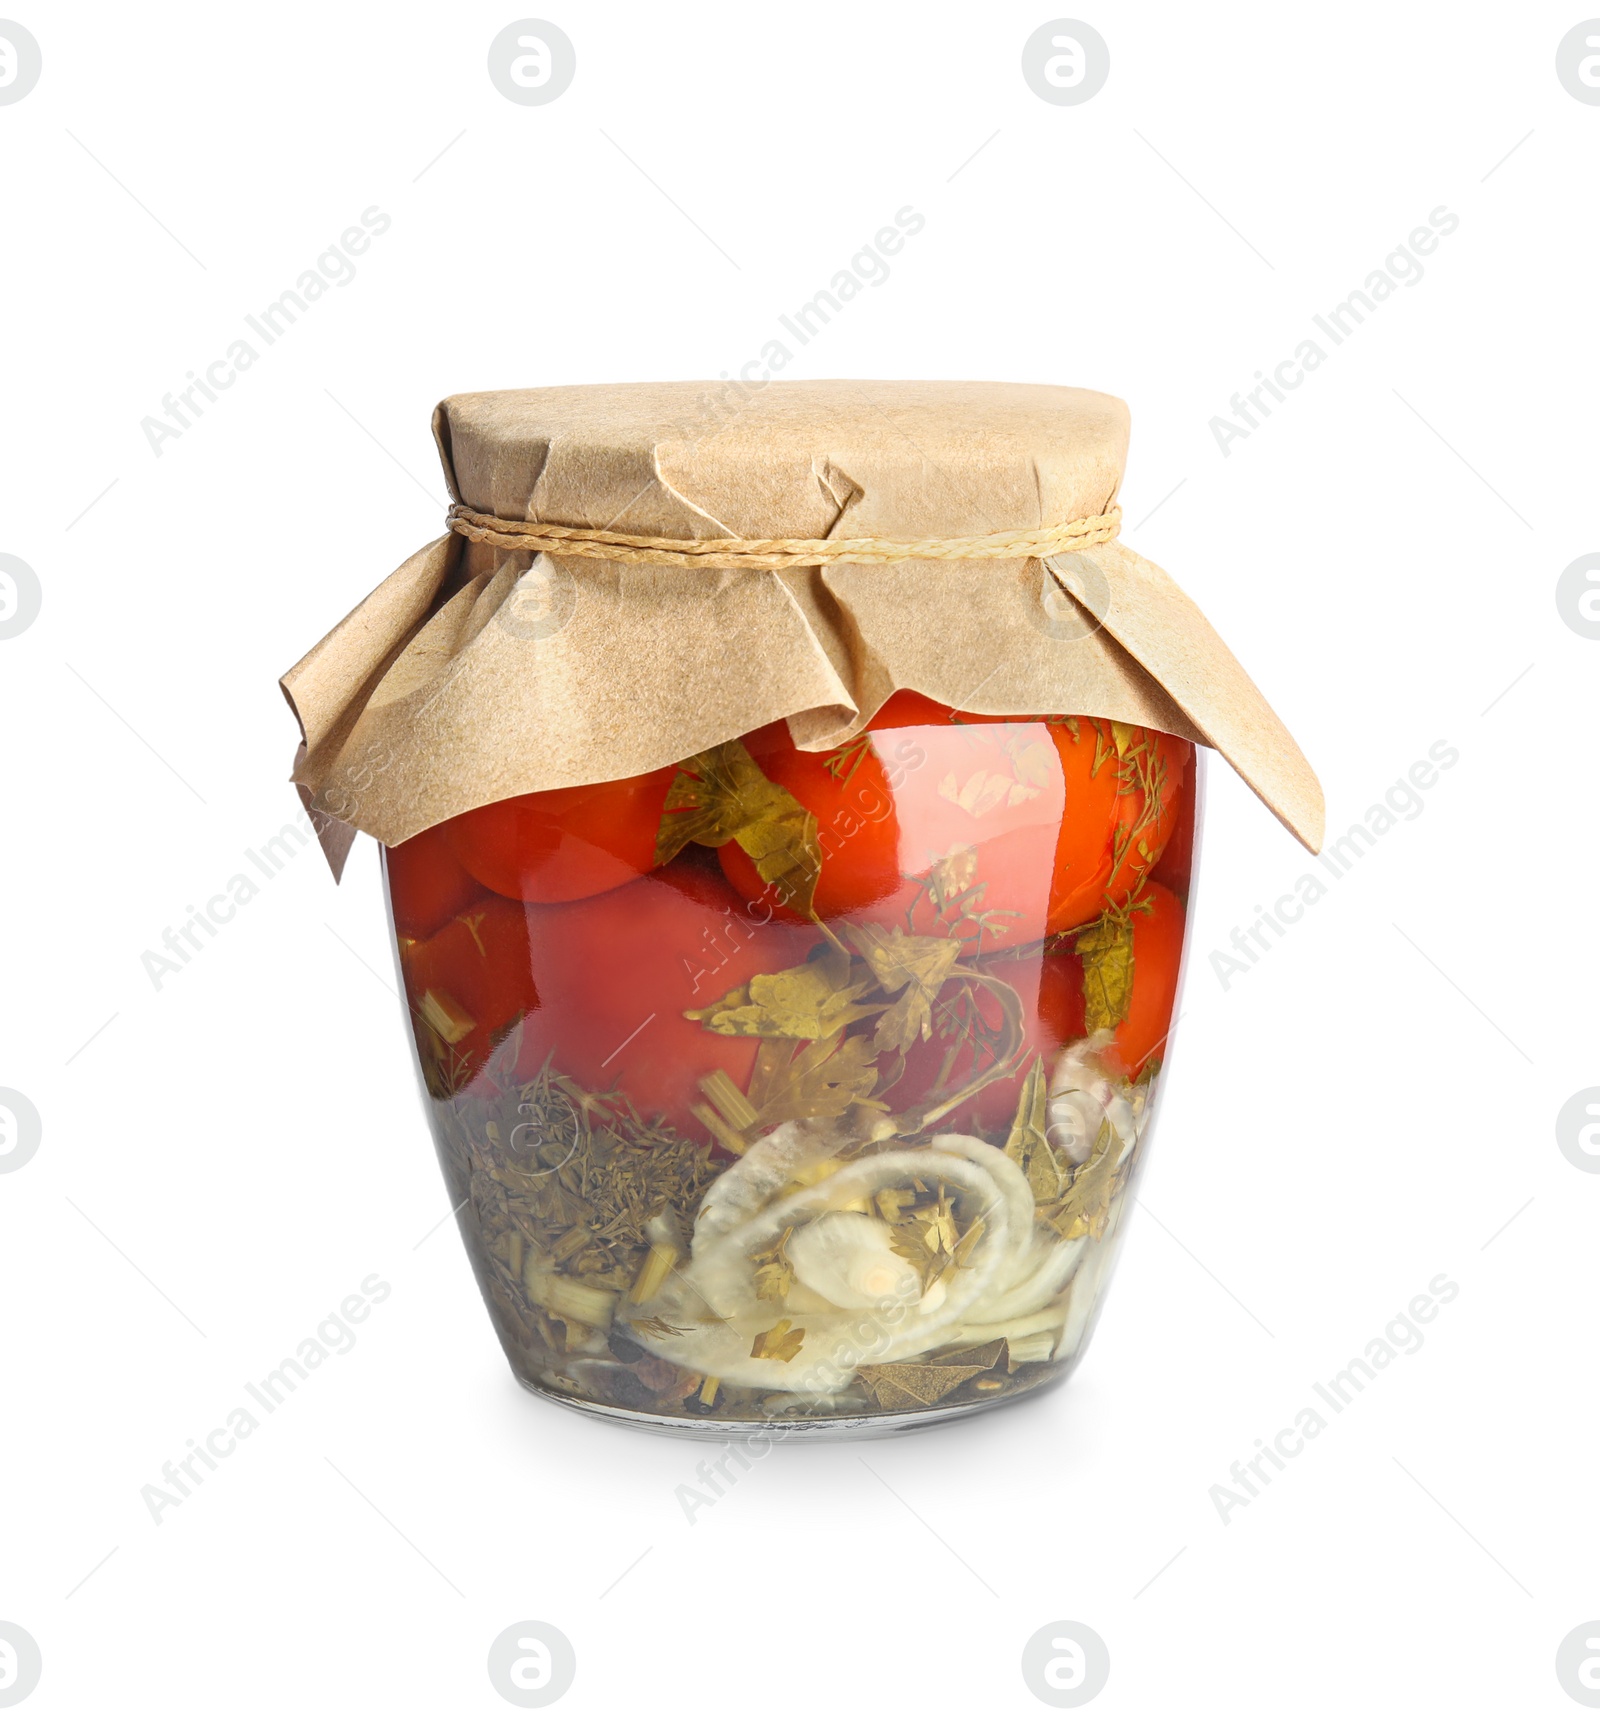 Photo of Pickled tomatoes in glass jar on white background